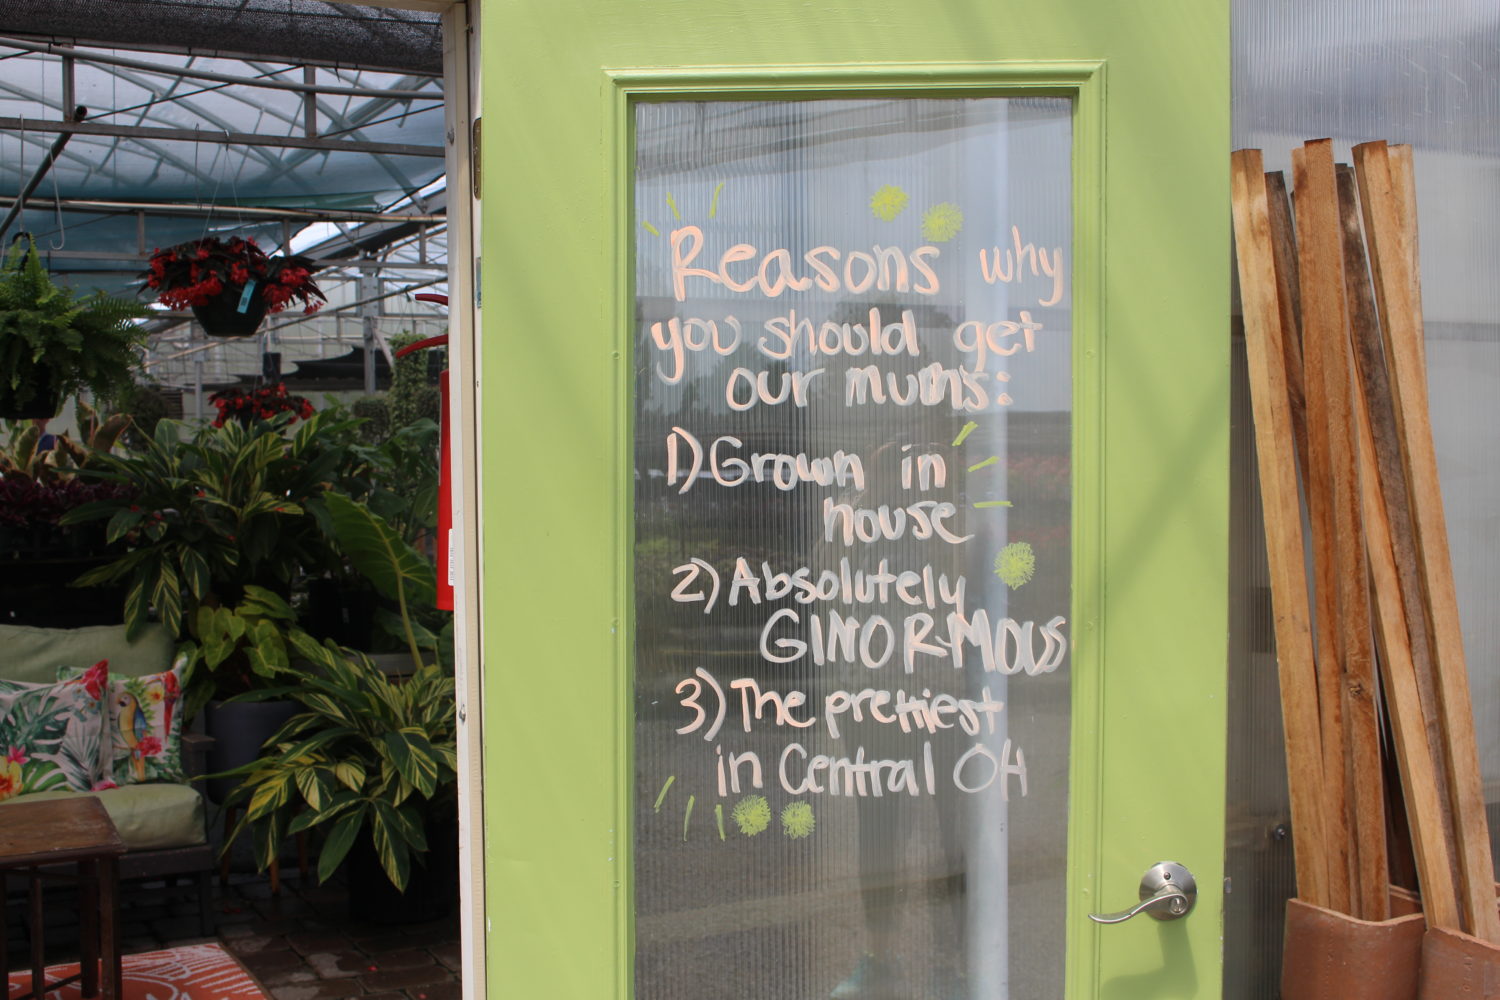 Hand-written signs on the doors remind customers of store hours and to return to purchase fall mums.